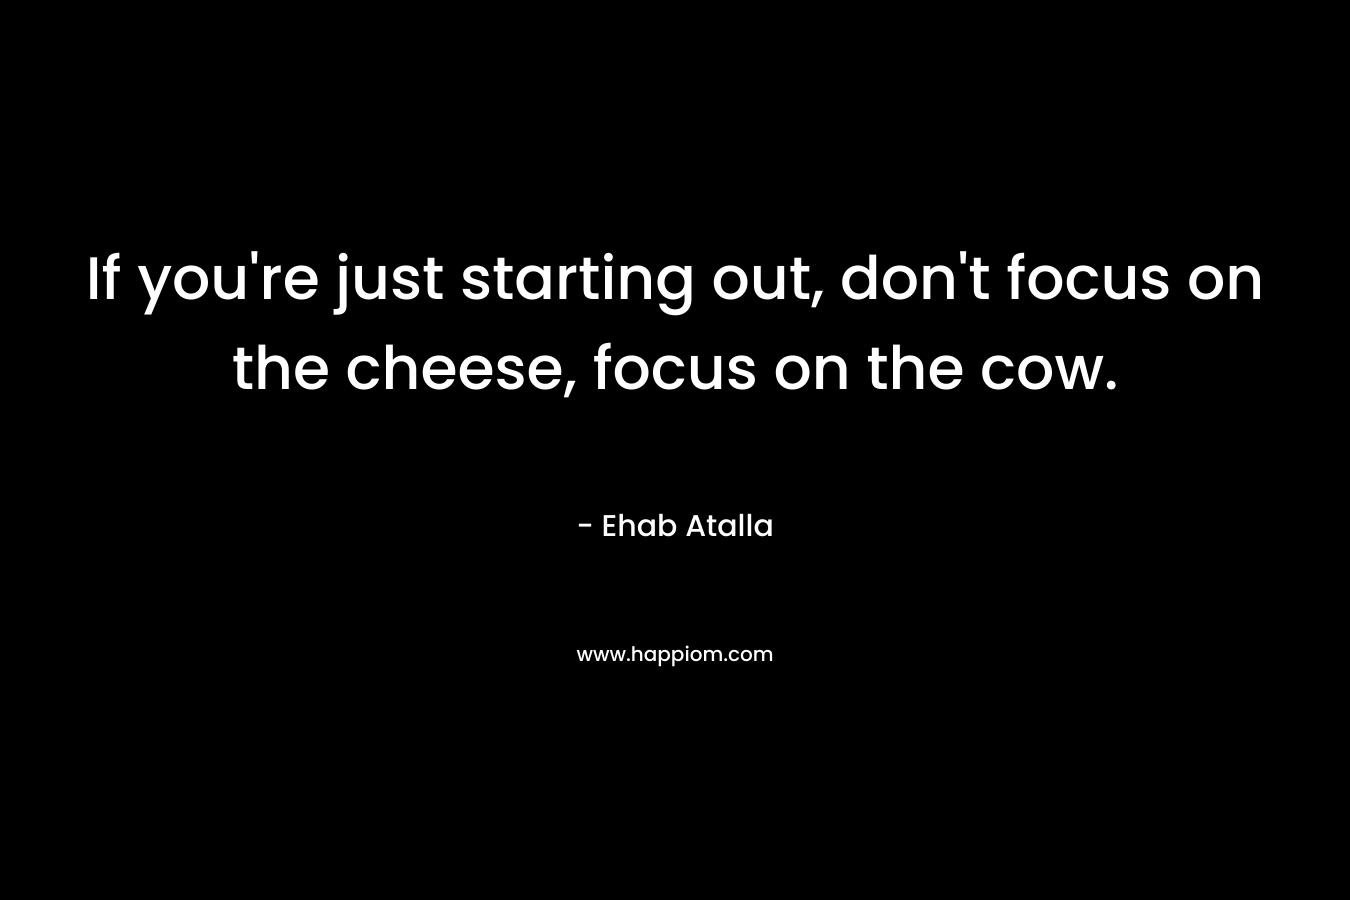 If you're just starting out, don't focus on the cheese, focus on the cow.